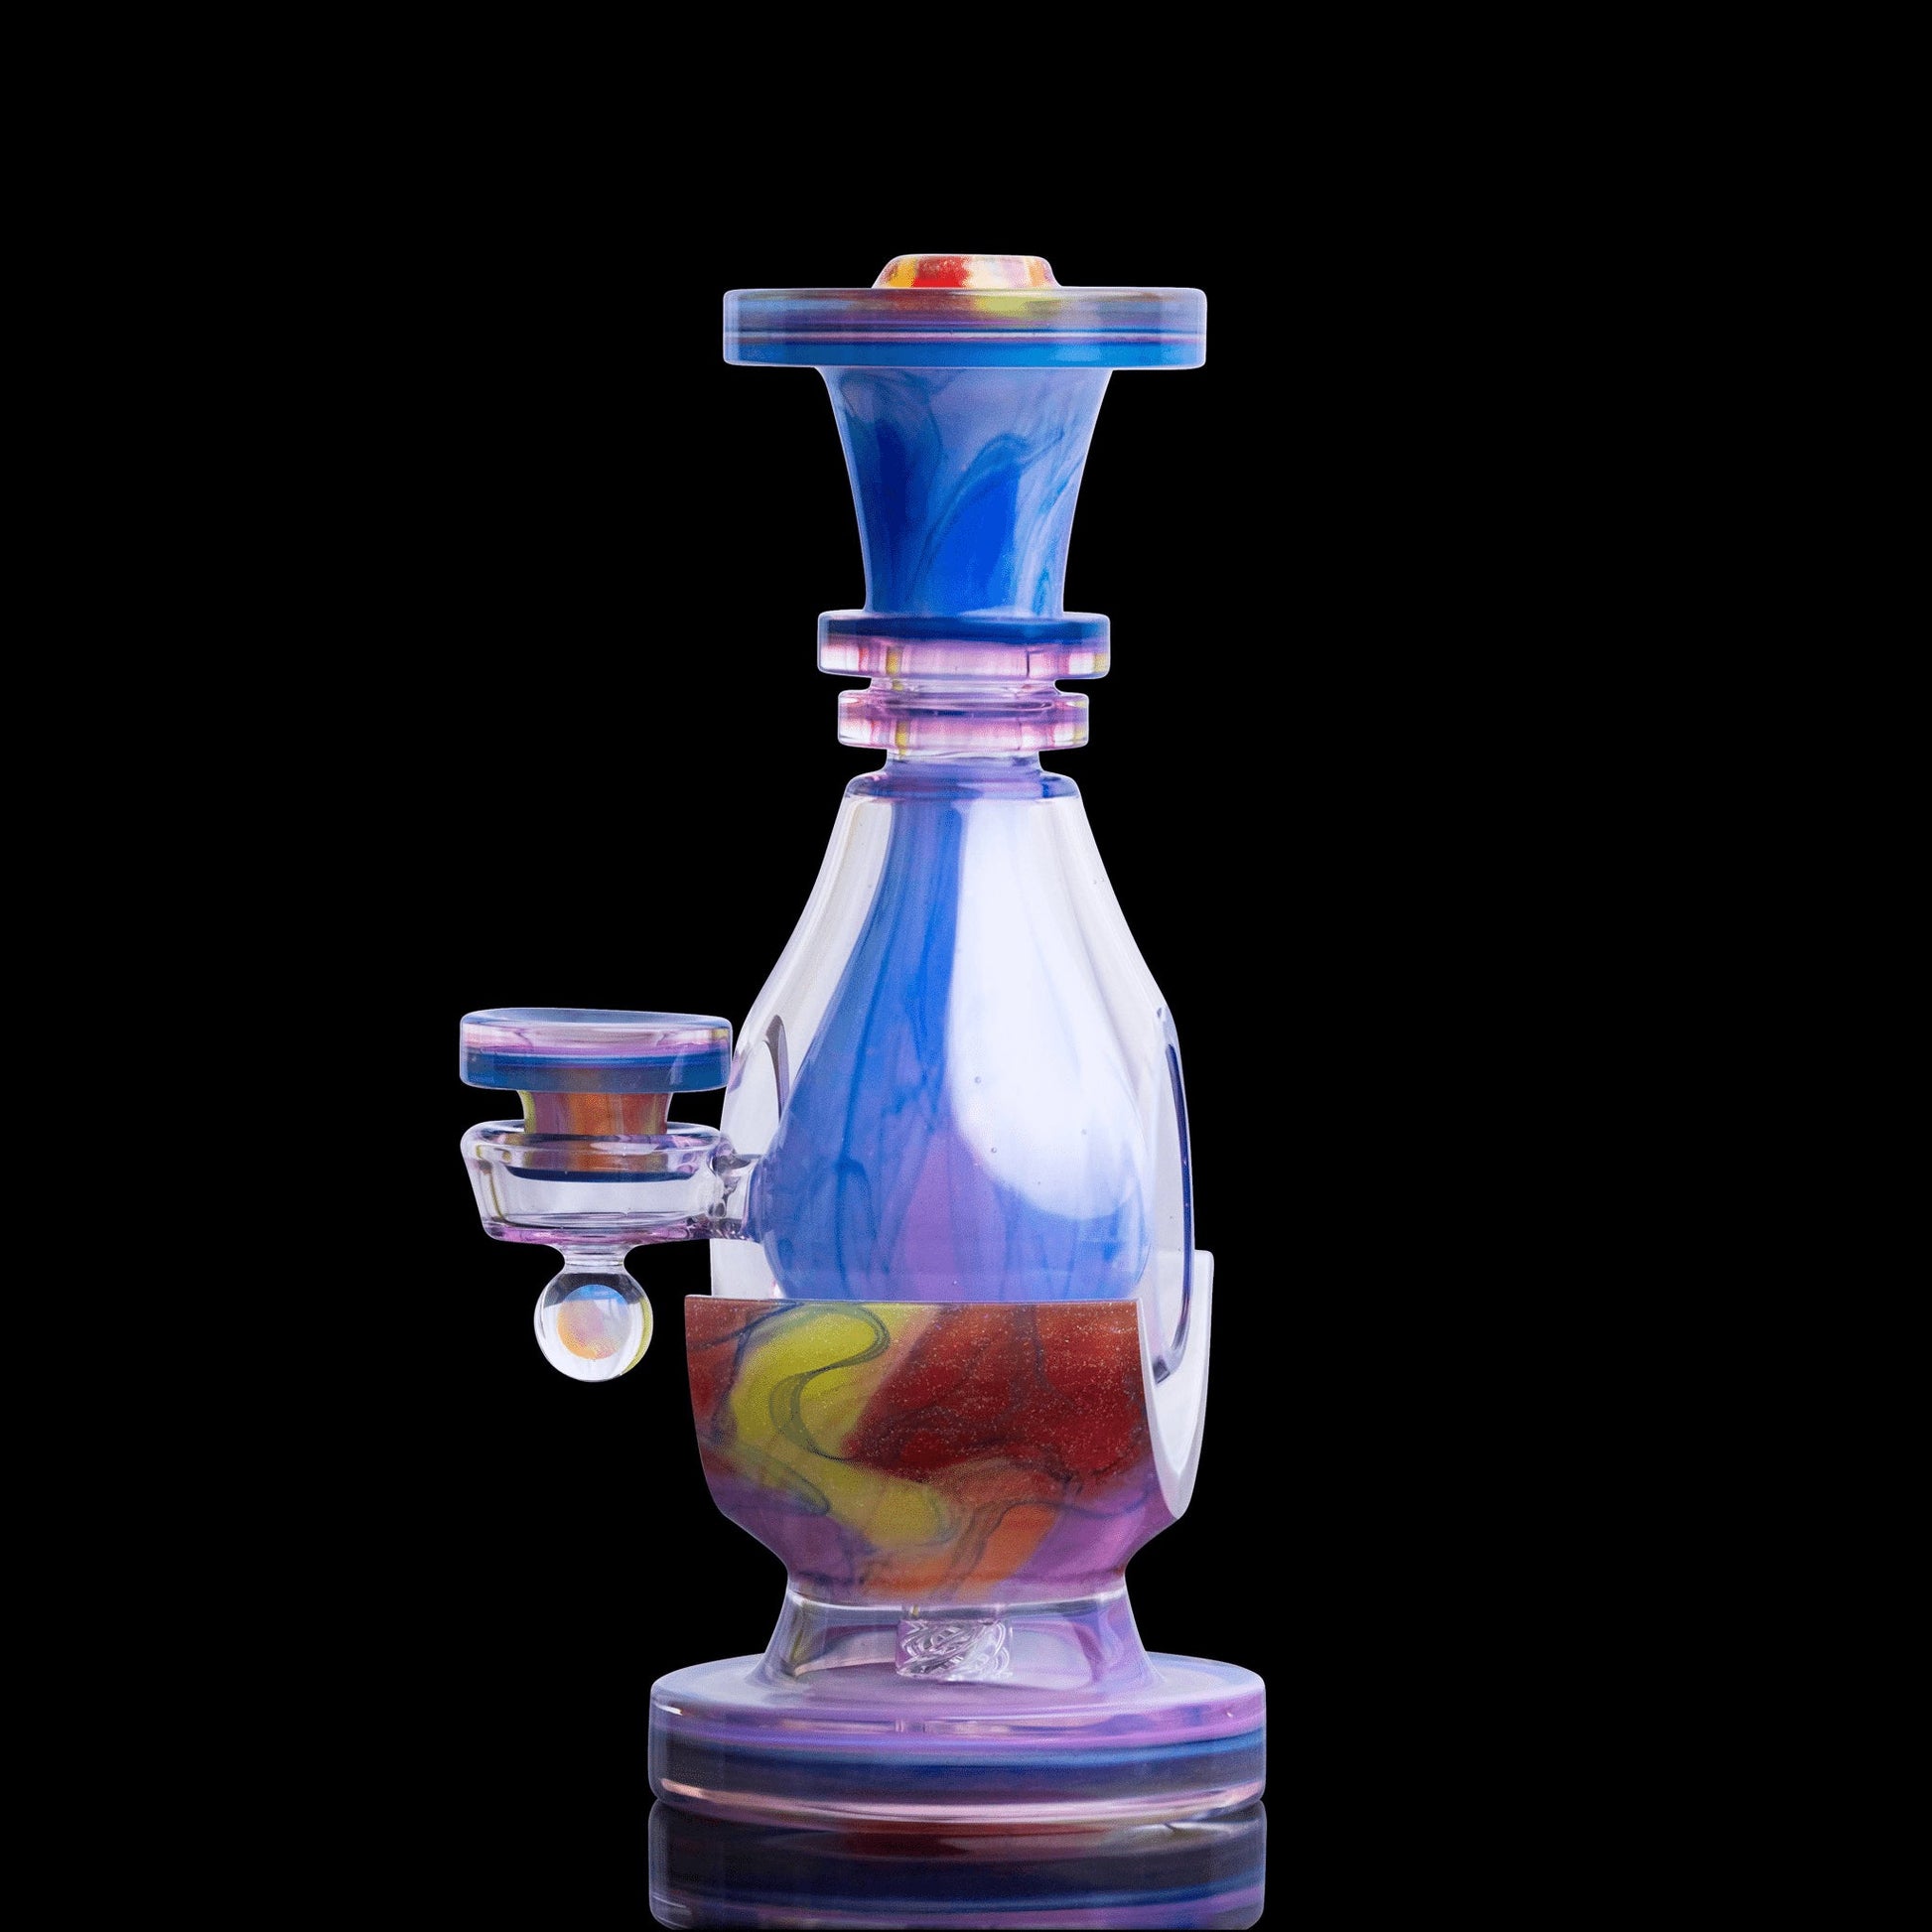 exquisite design of the Scribble Collab Rig by Scolari Glass &amp; Scomo Moanet (2021)